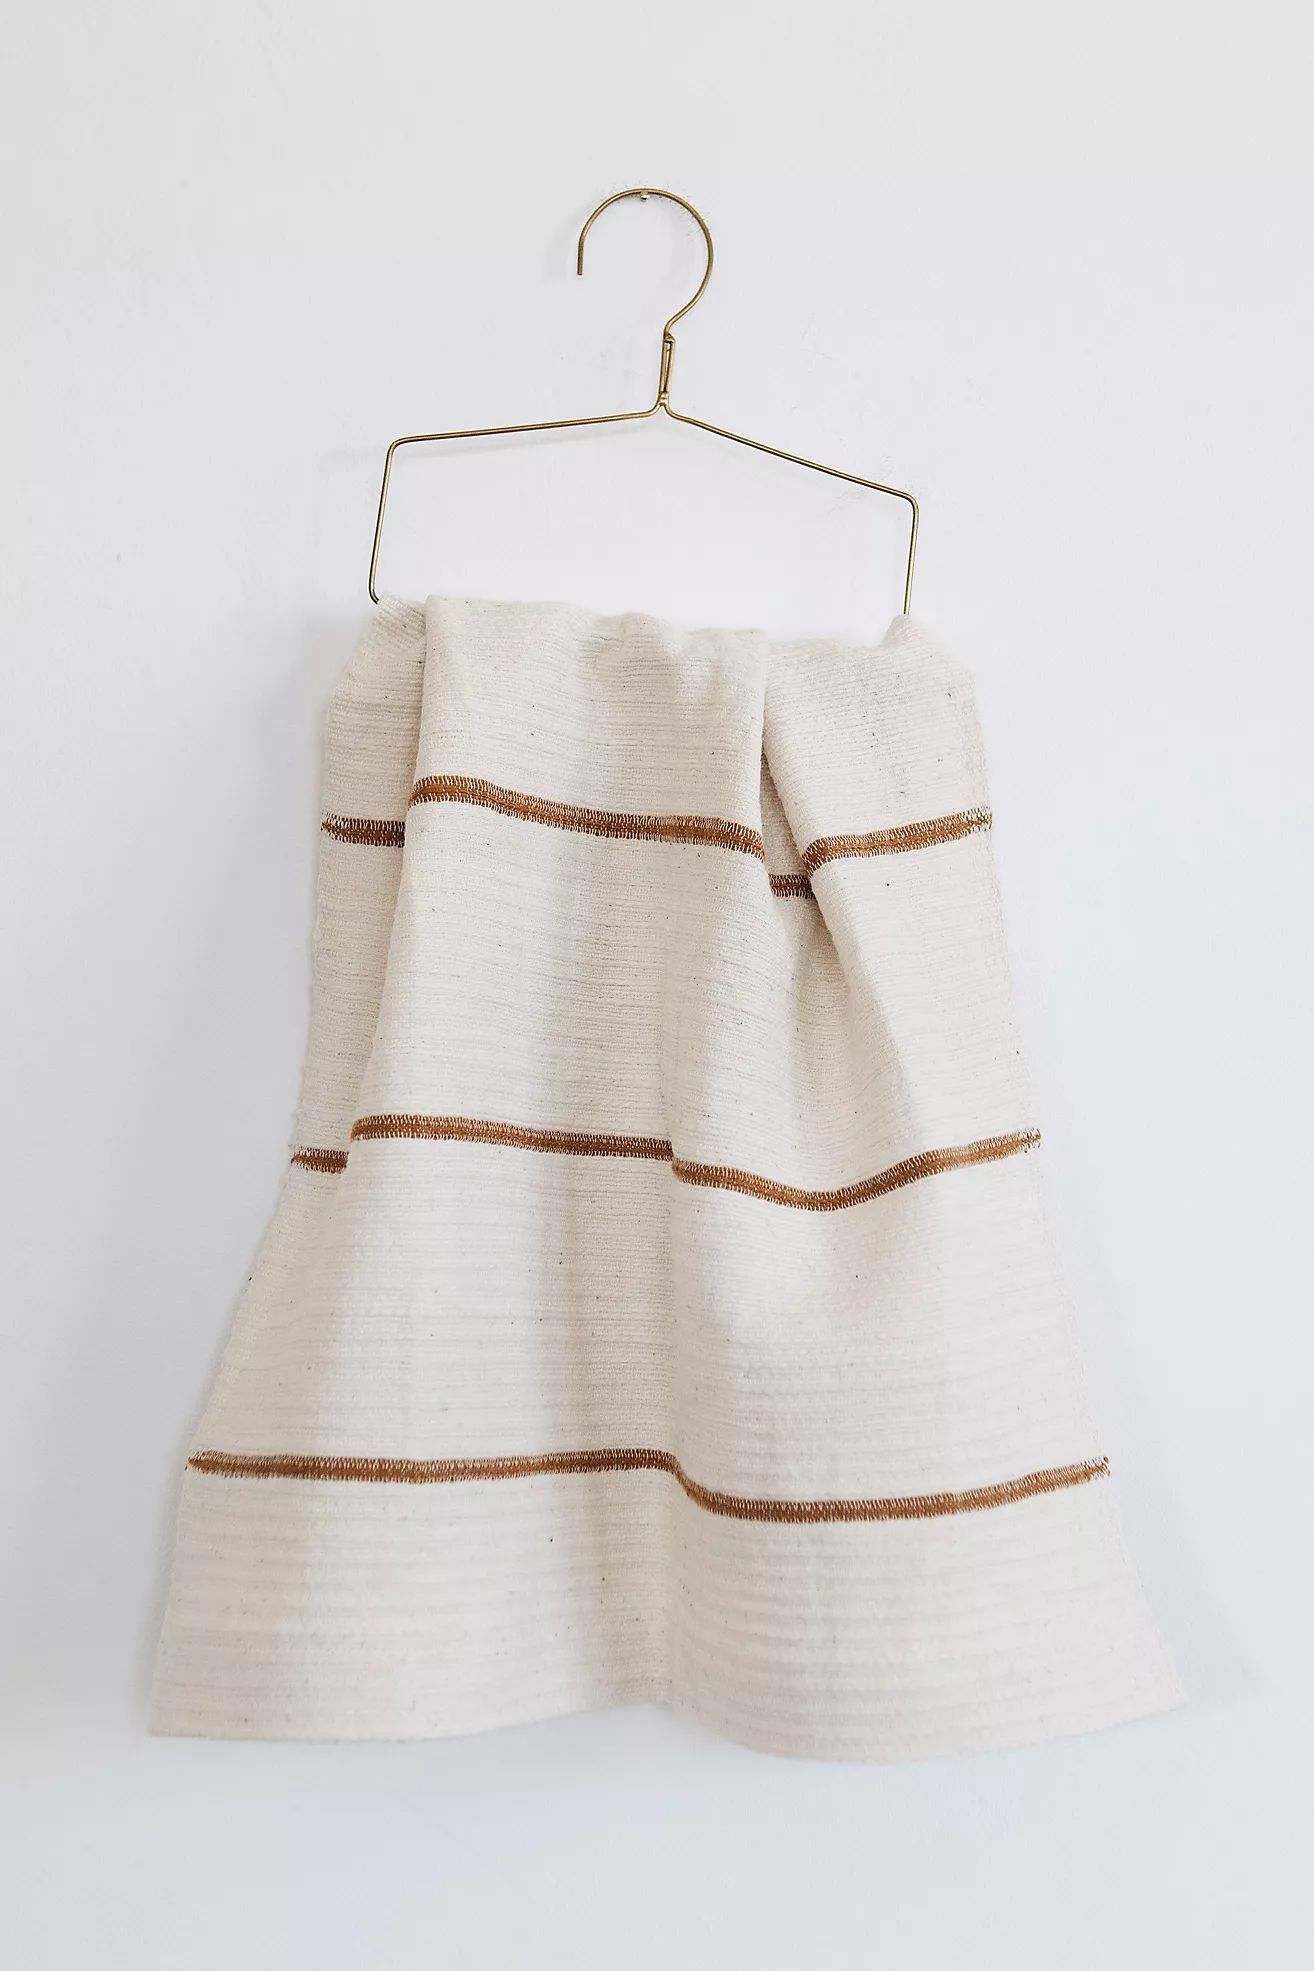 Connected Goods Izzy Hand Towel No. 0931 | Anthropologie (US)